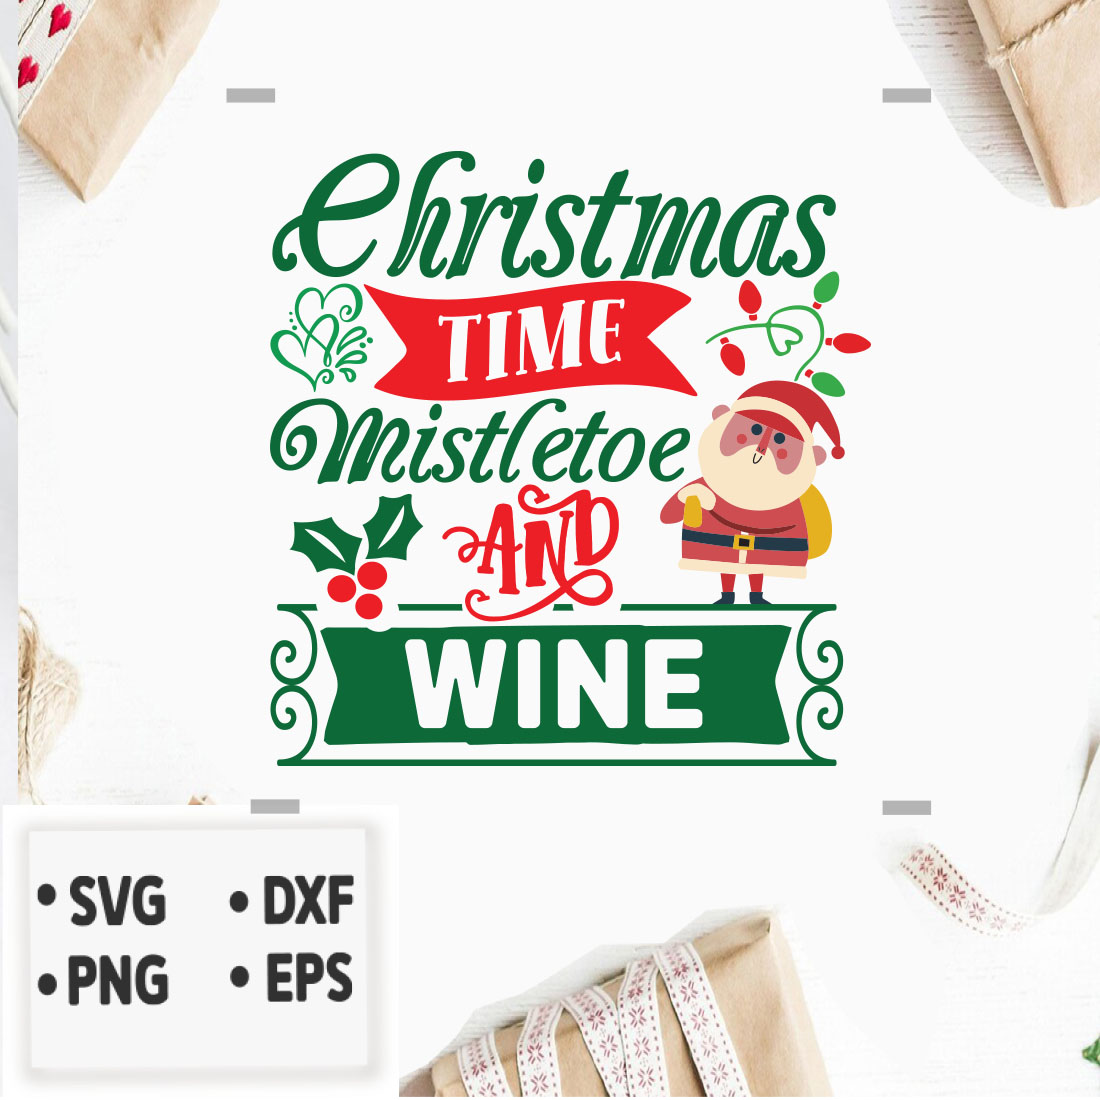 Image with irresistible Christmas time mistletoe and wine print.